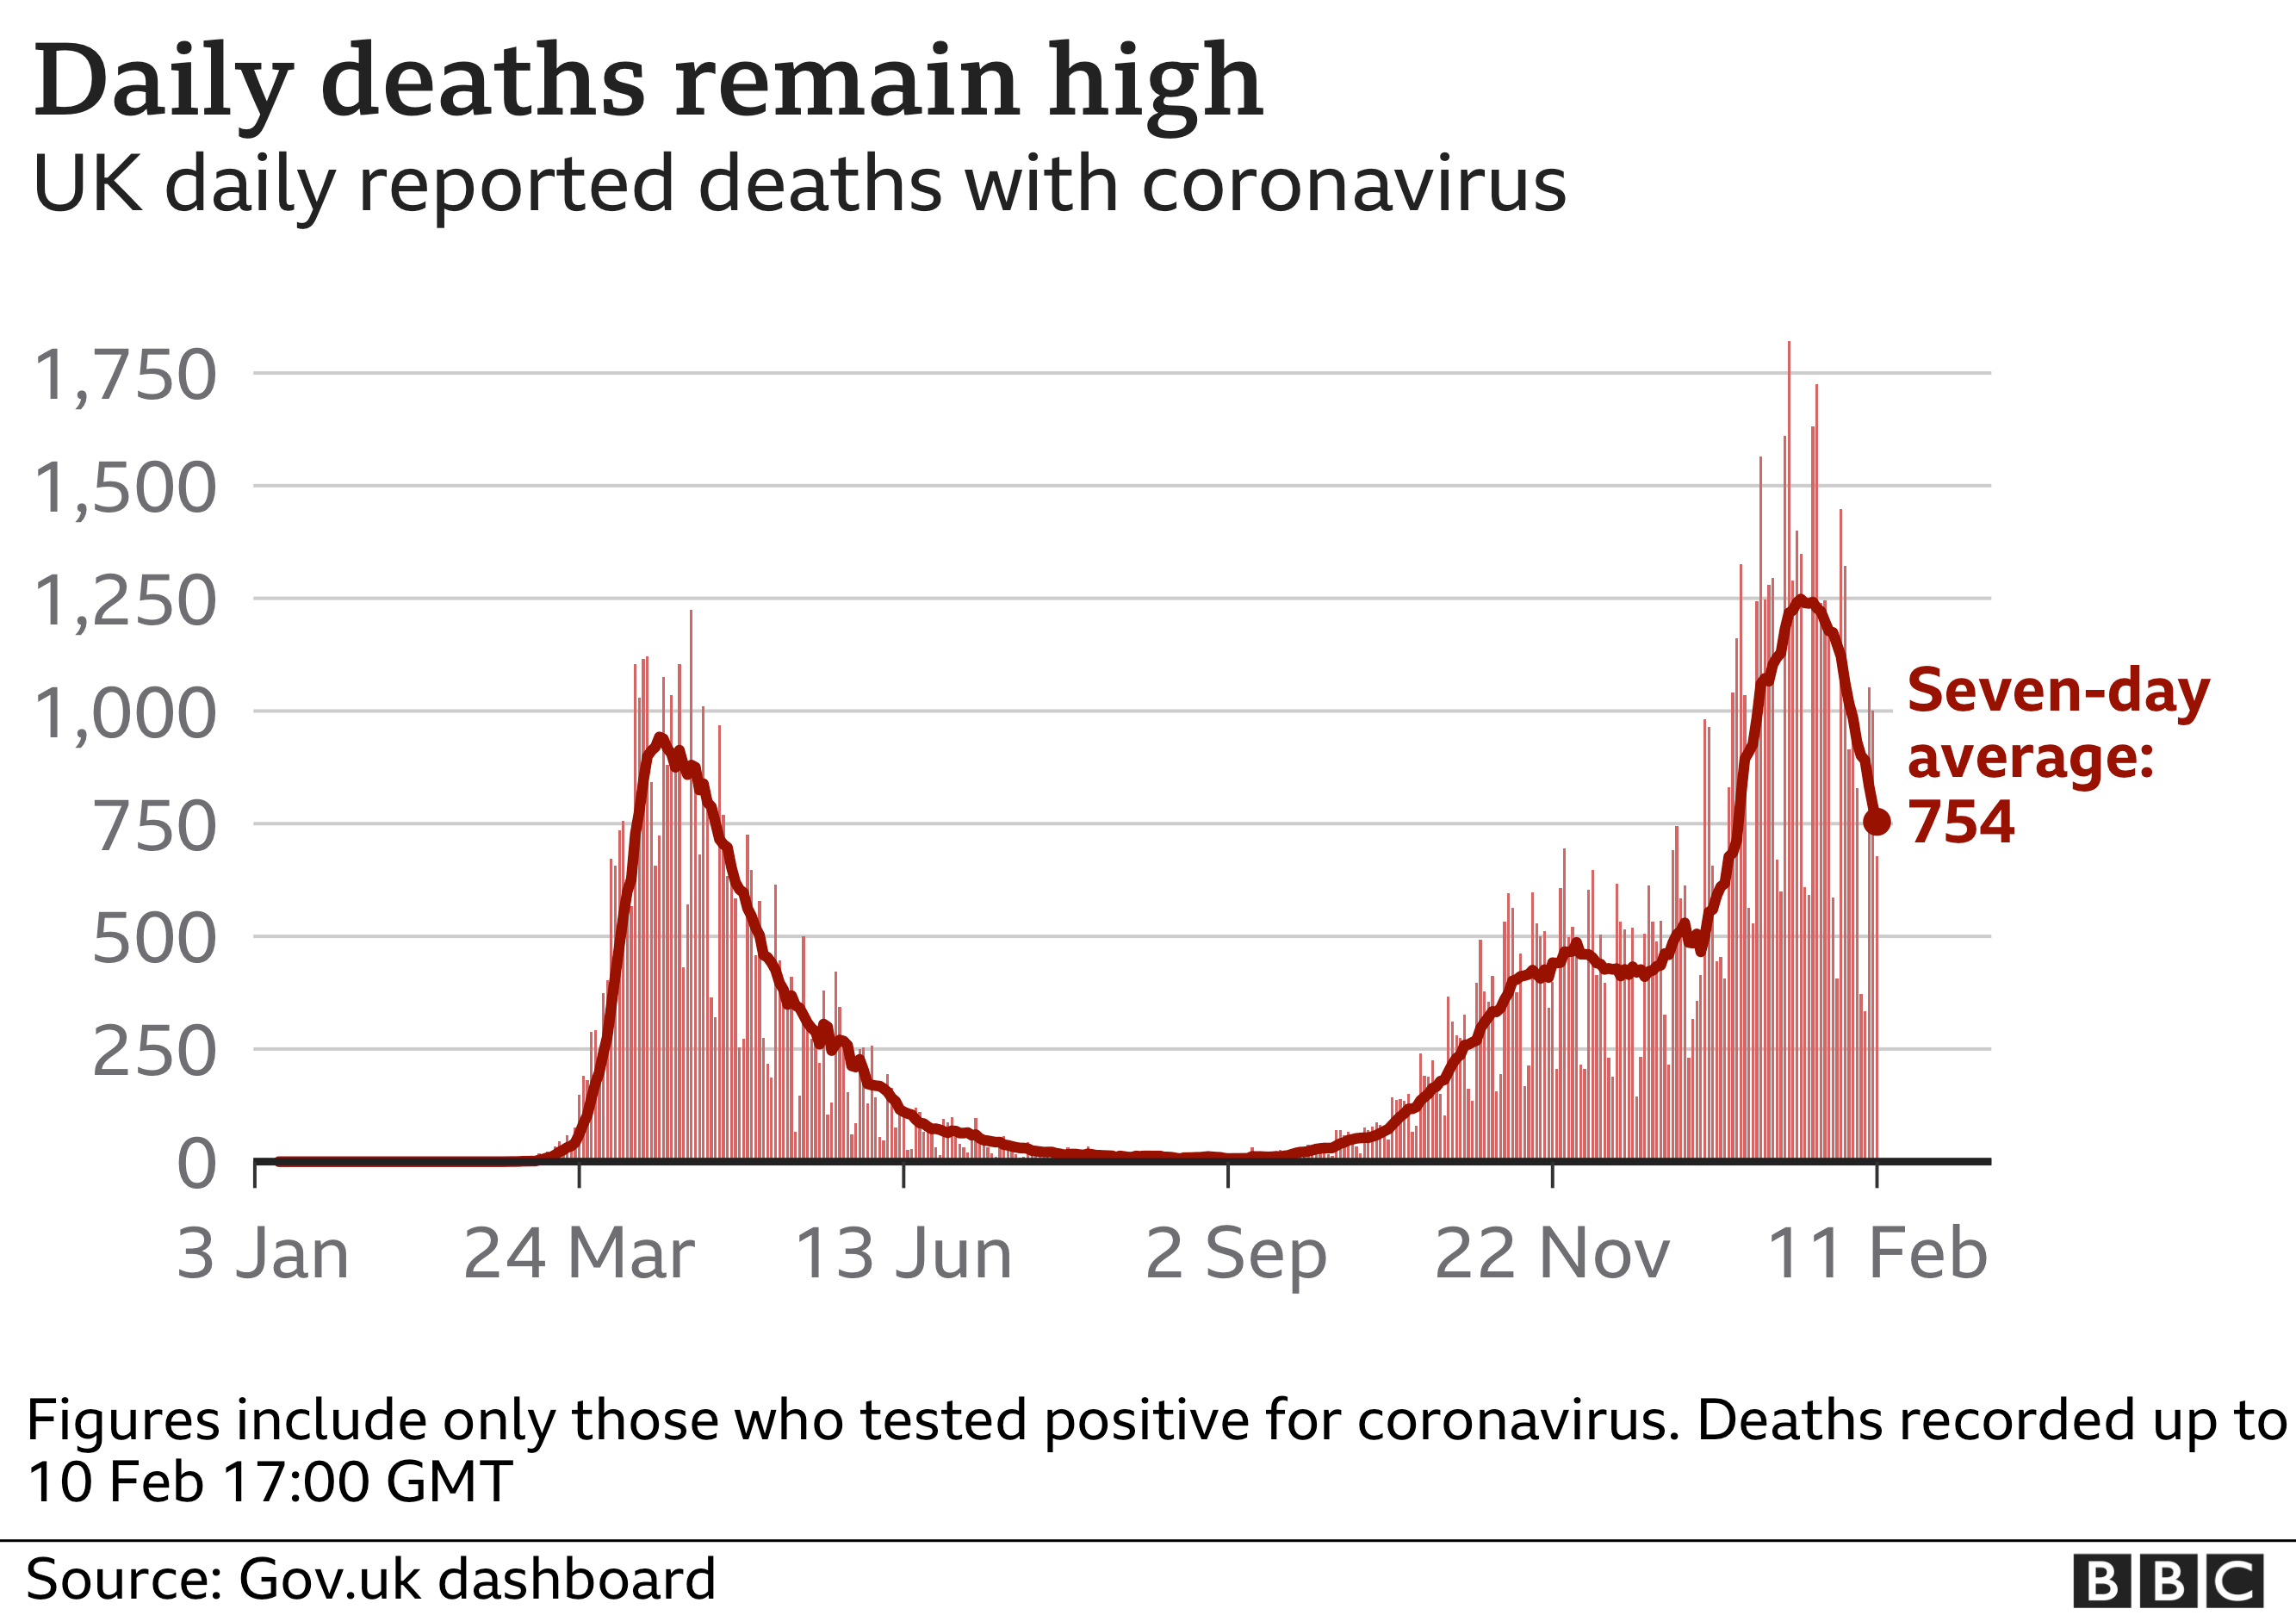 Chart showing daily deaths are still high